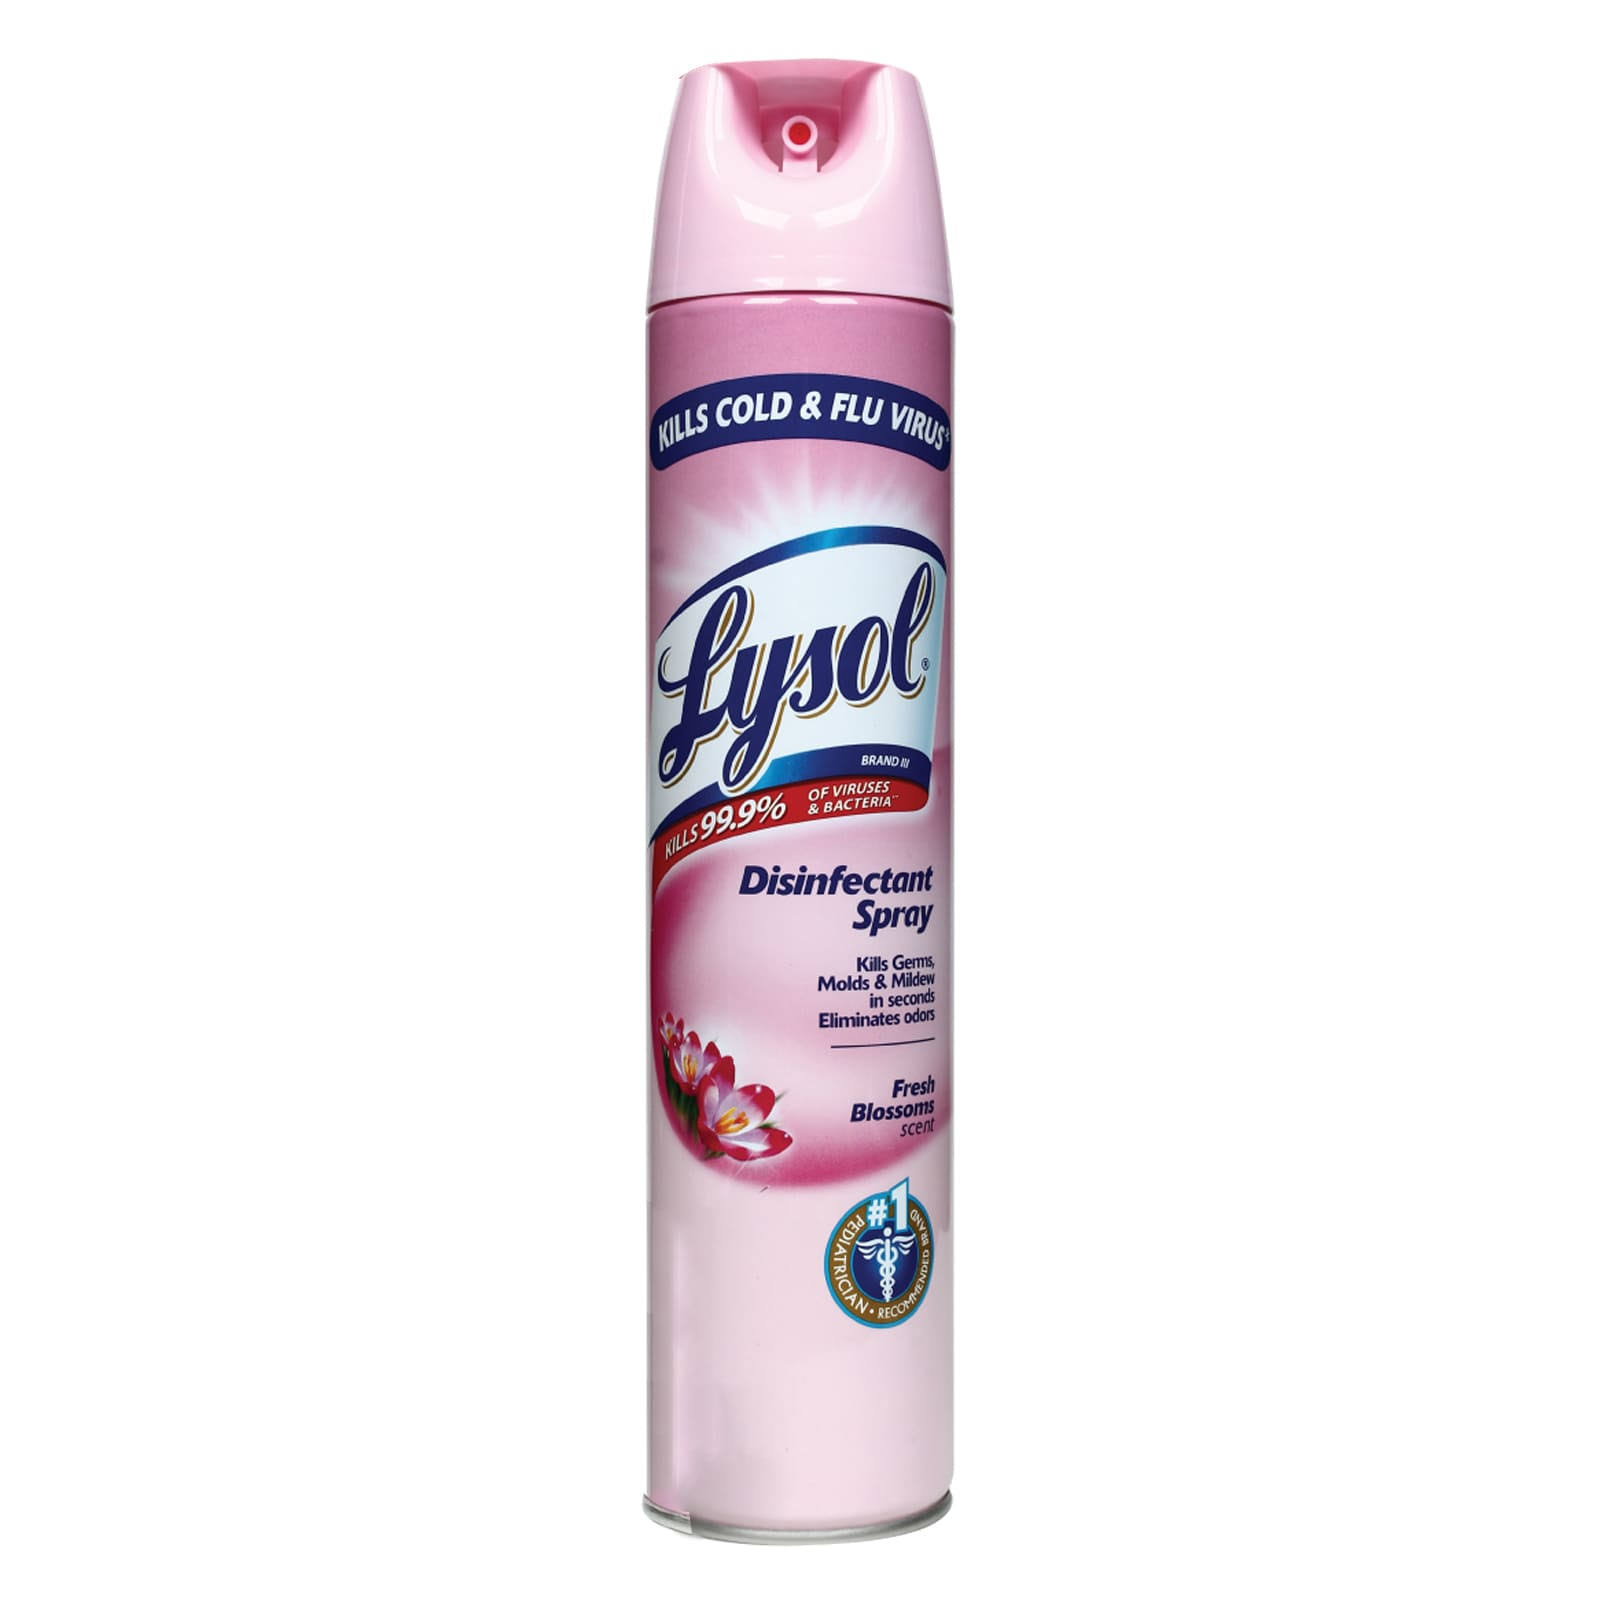 Lysol Fresh Blossom Disinfectant Spray - 510 Grams - Al's Marketplace - Delivered by Mercato